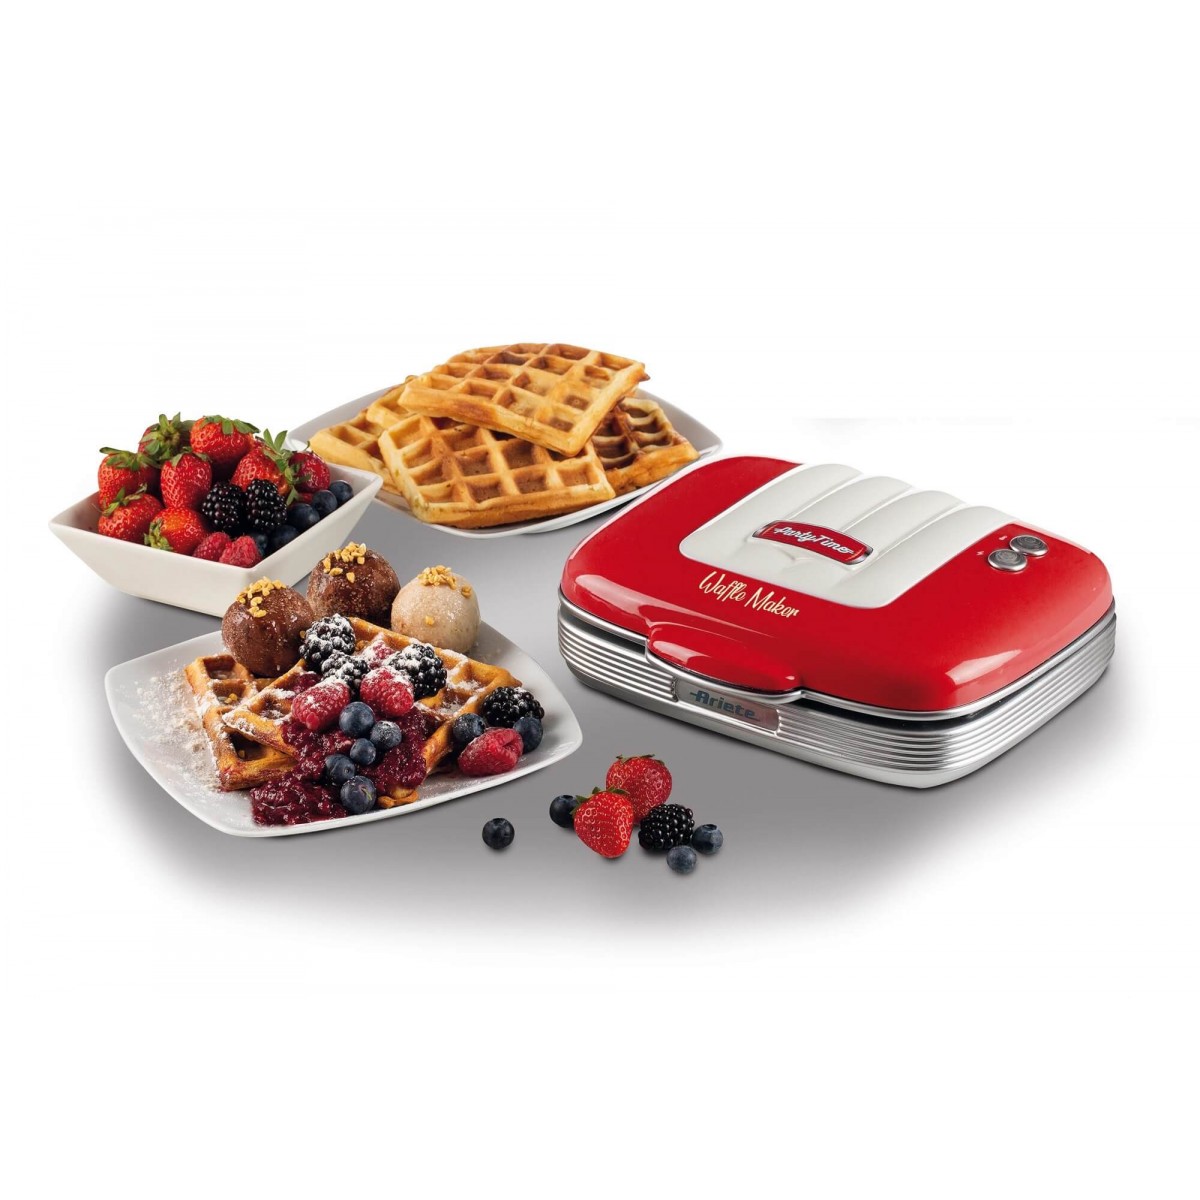 Piastra elettrica per waffle, Waffle Maker Party Time, Ariete 1973 Rosso